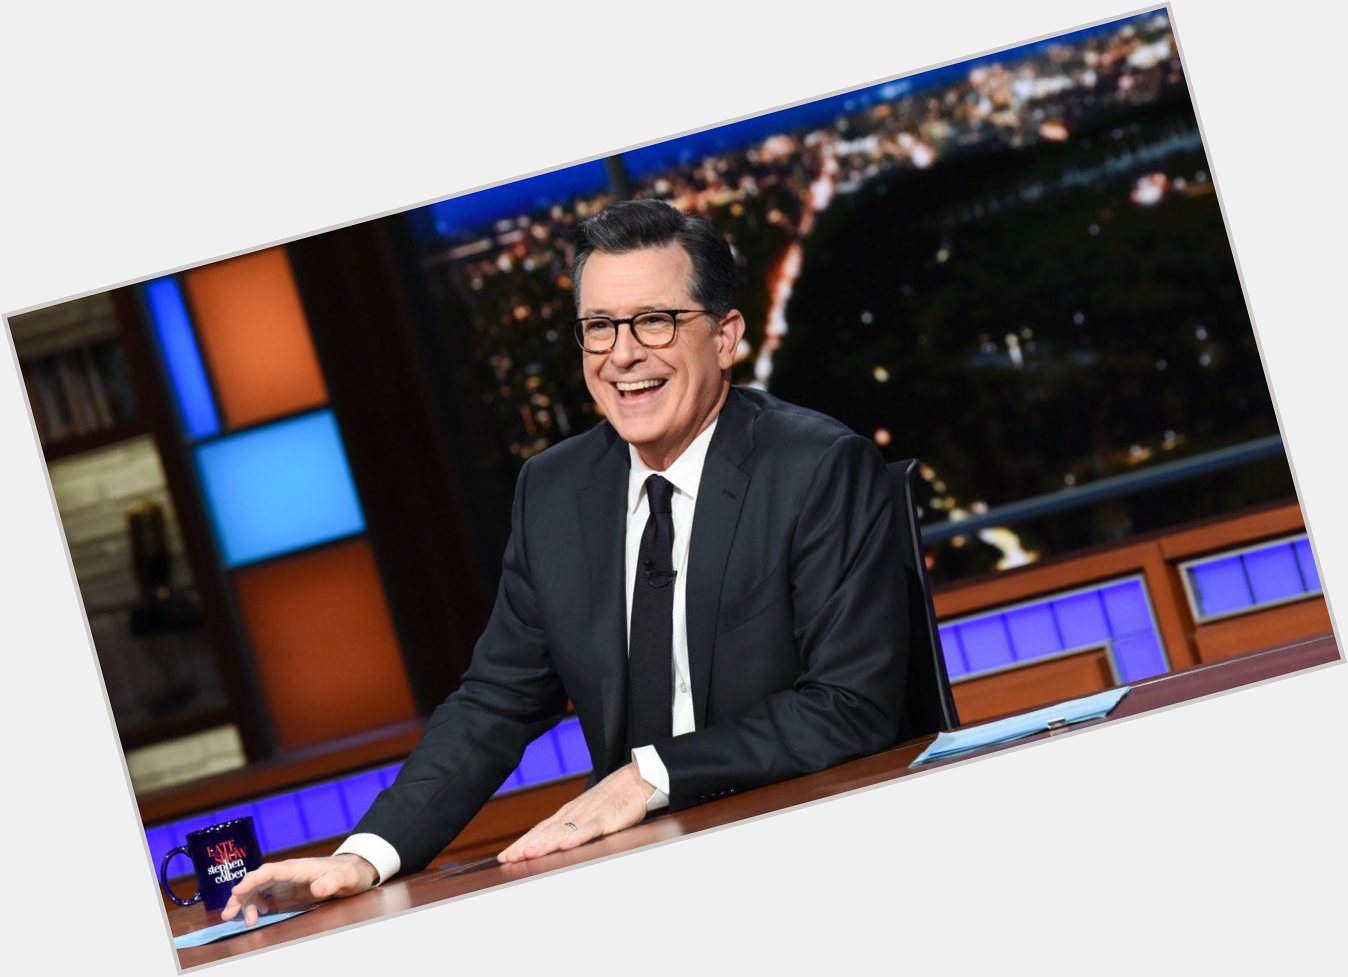 Happy Birthday to political and comedic icon Stephen Colbert! 